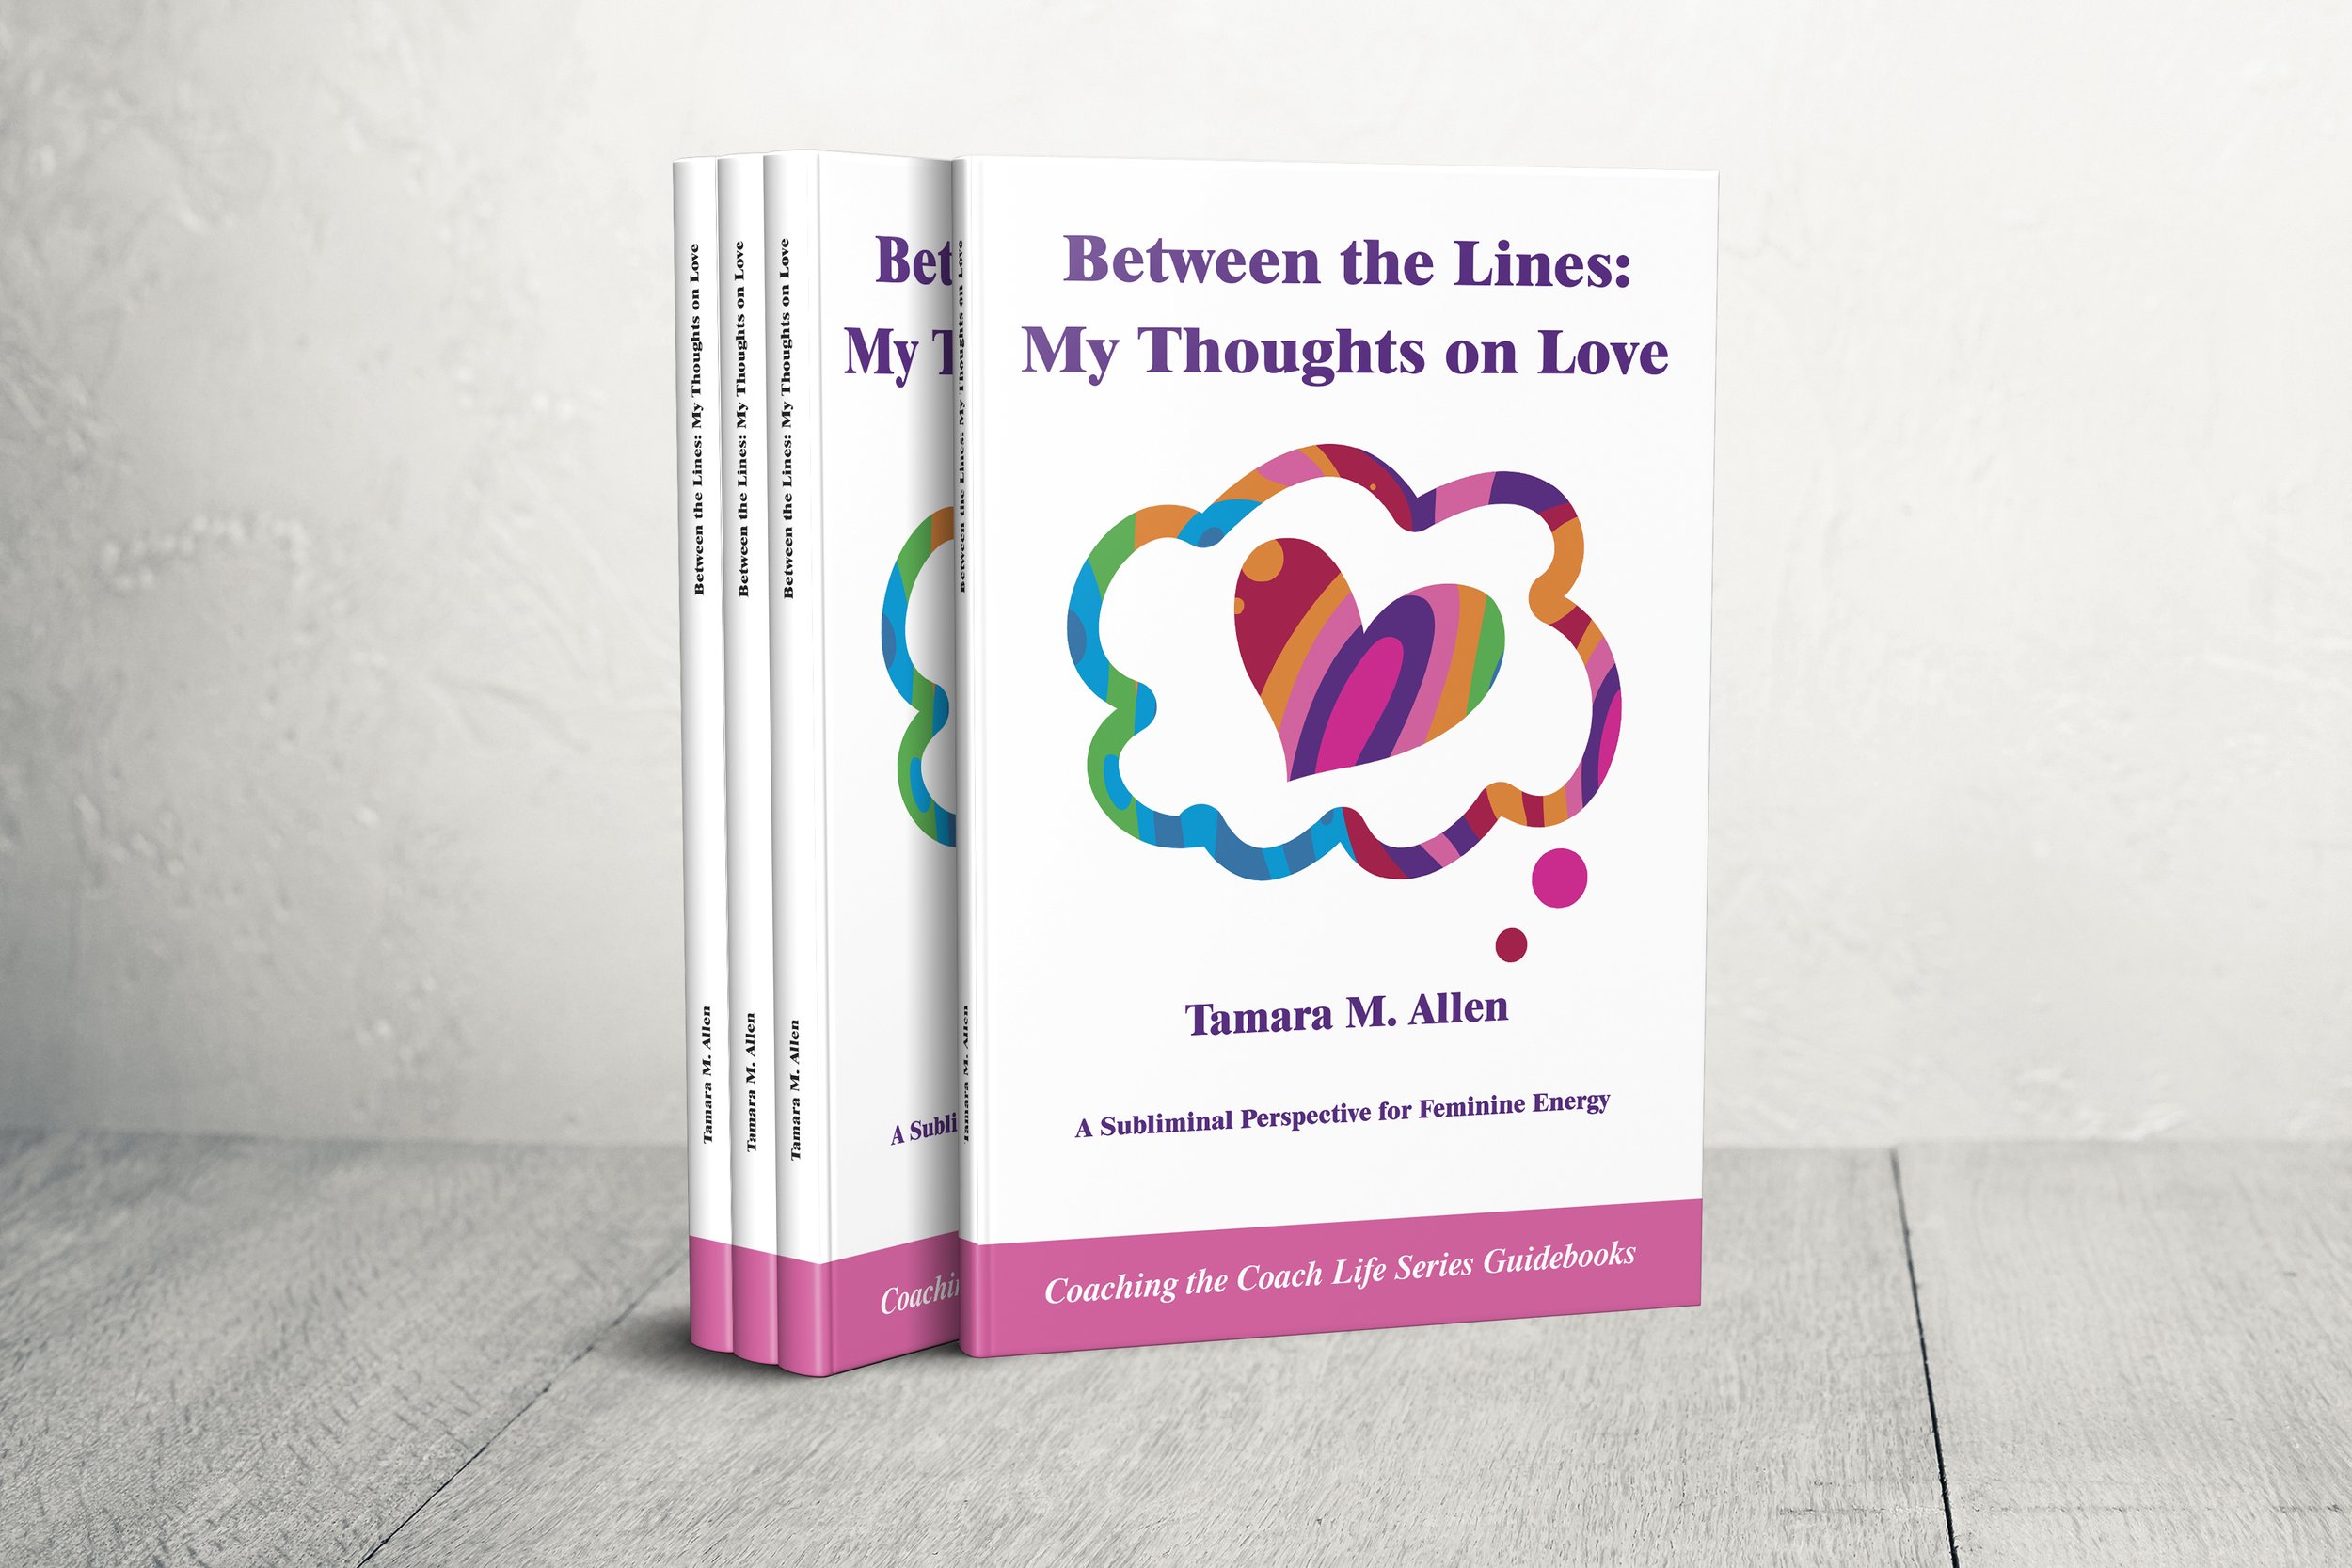 Between the Lines: My Thoughts on Love